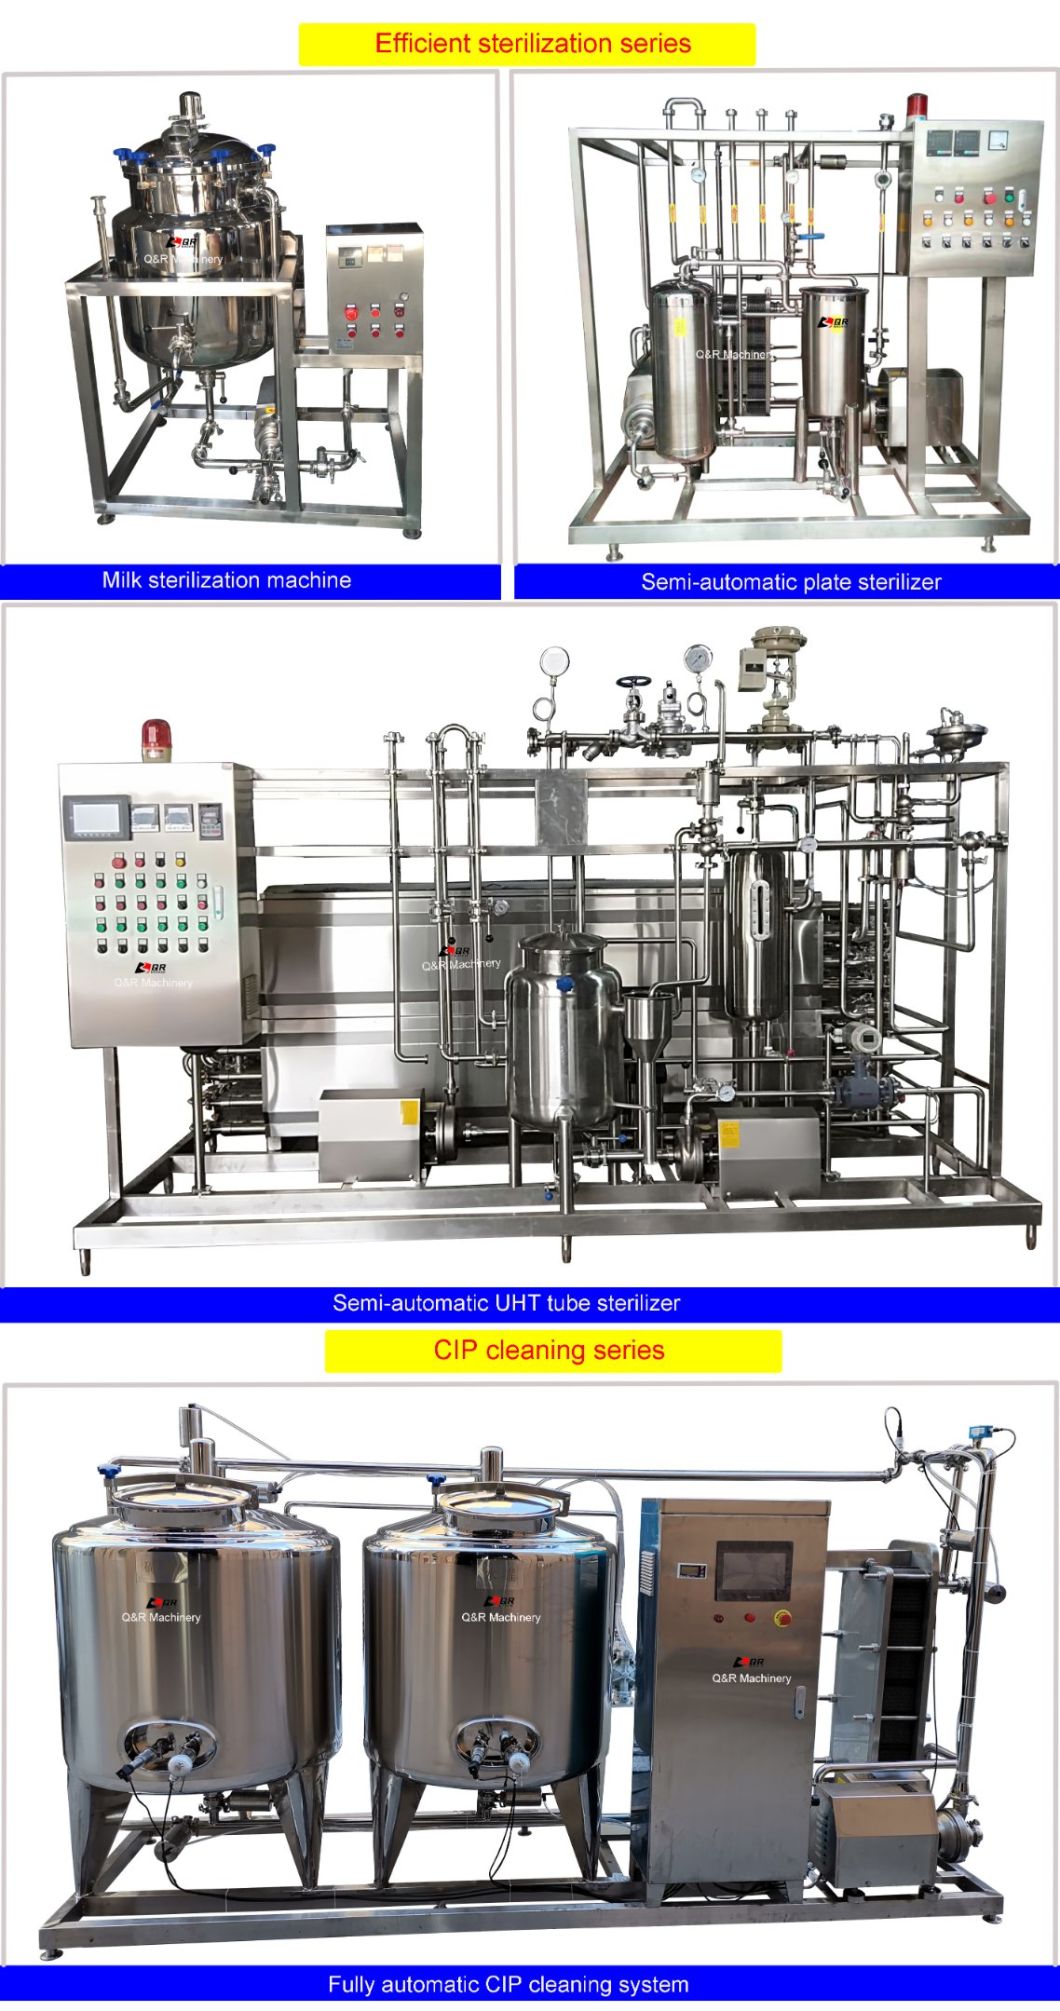 Stainless Steel Energy Efficient Double Wall Liquid Chemical Agitator Tank